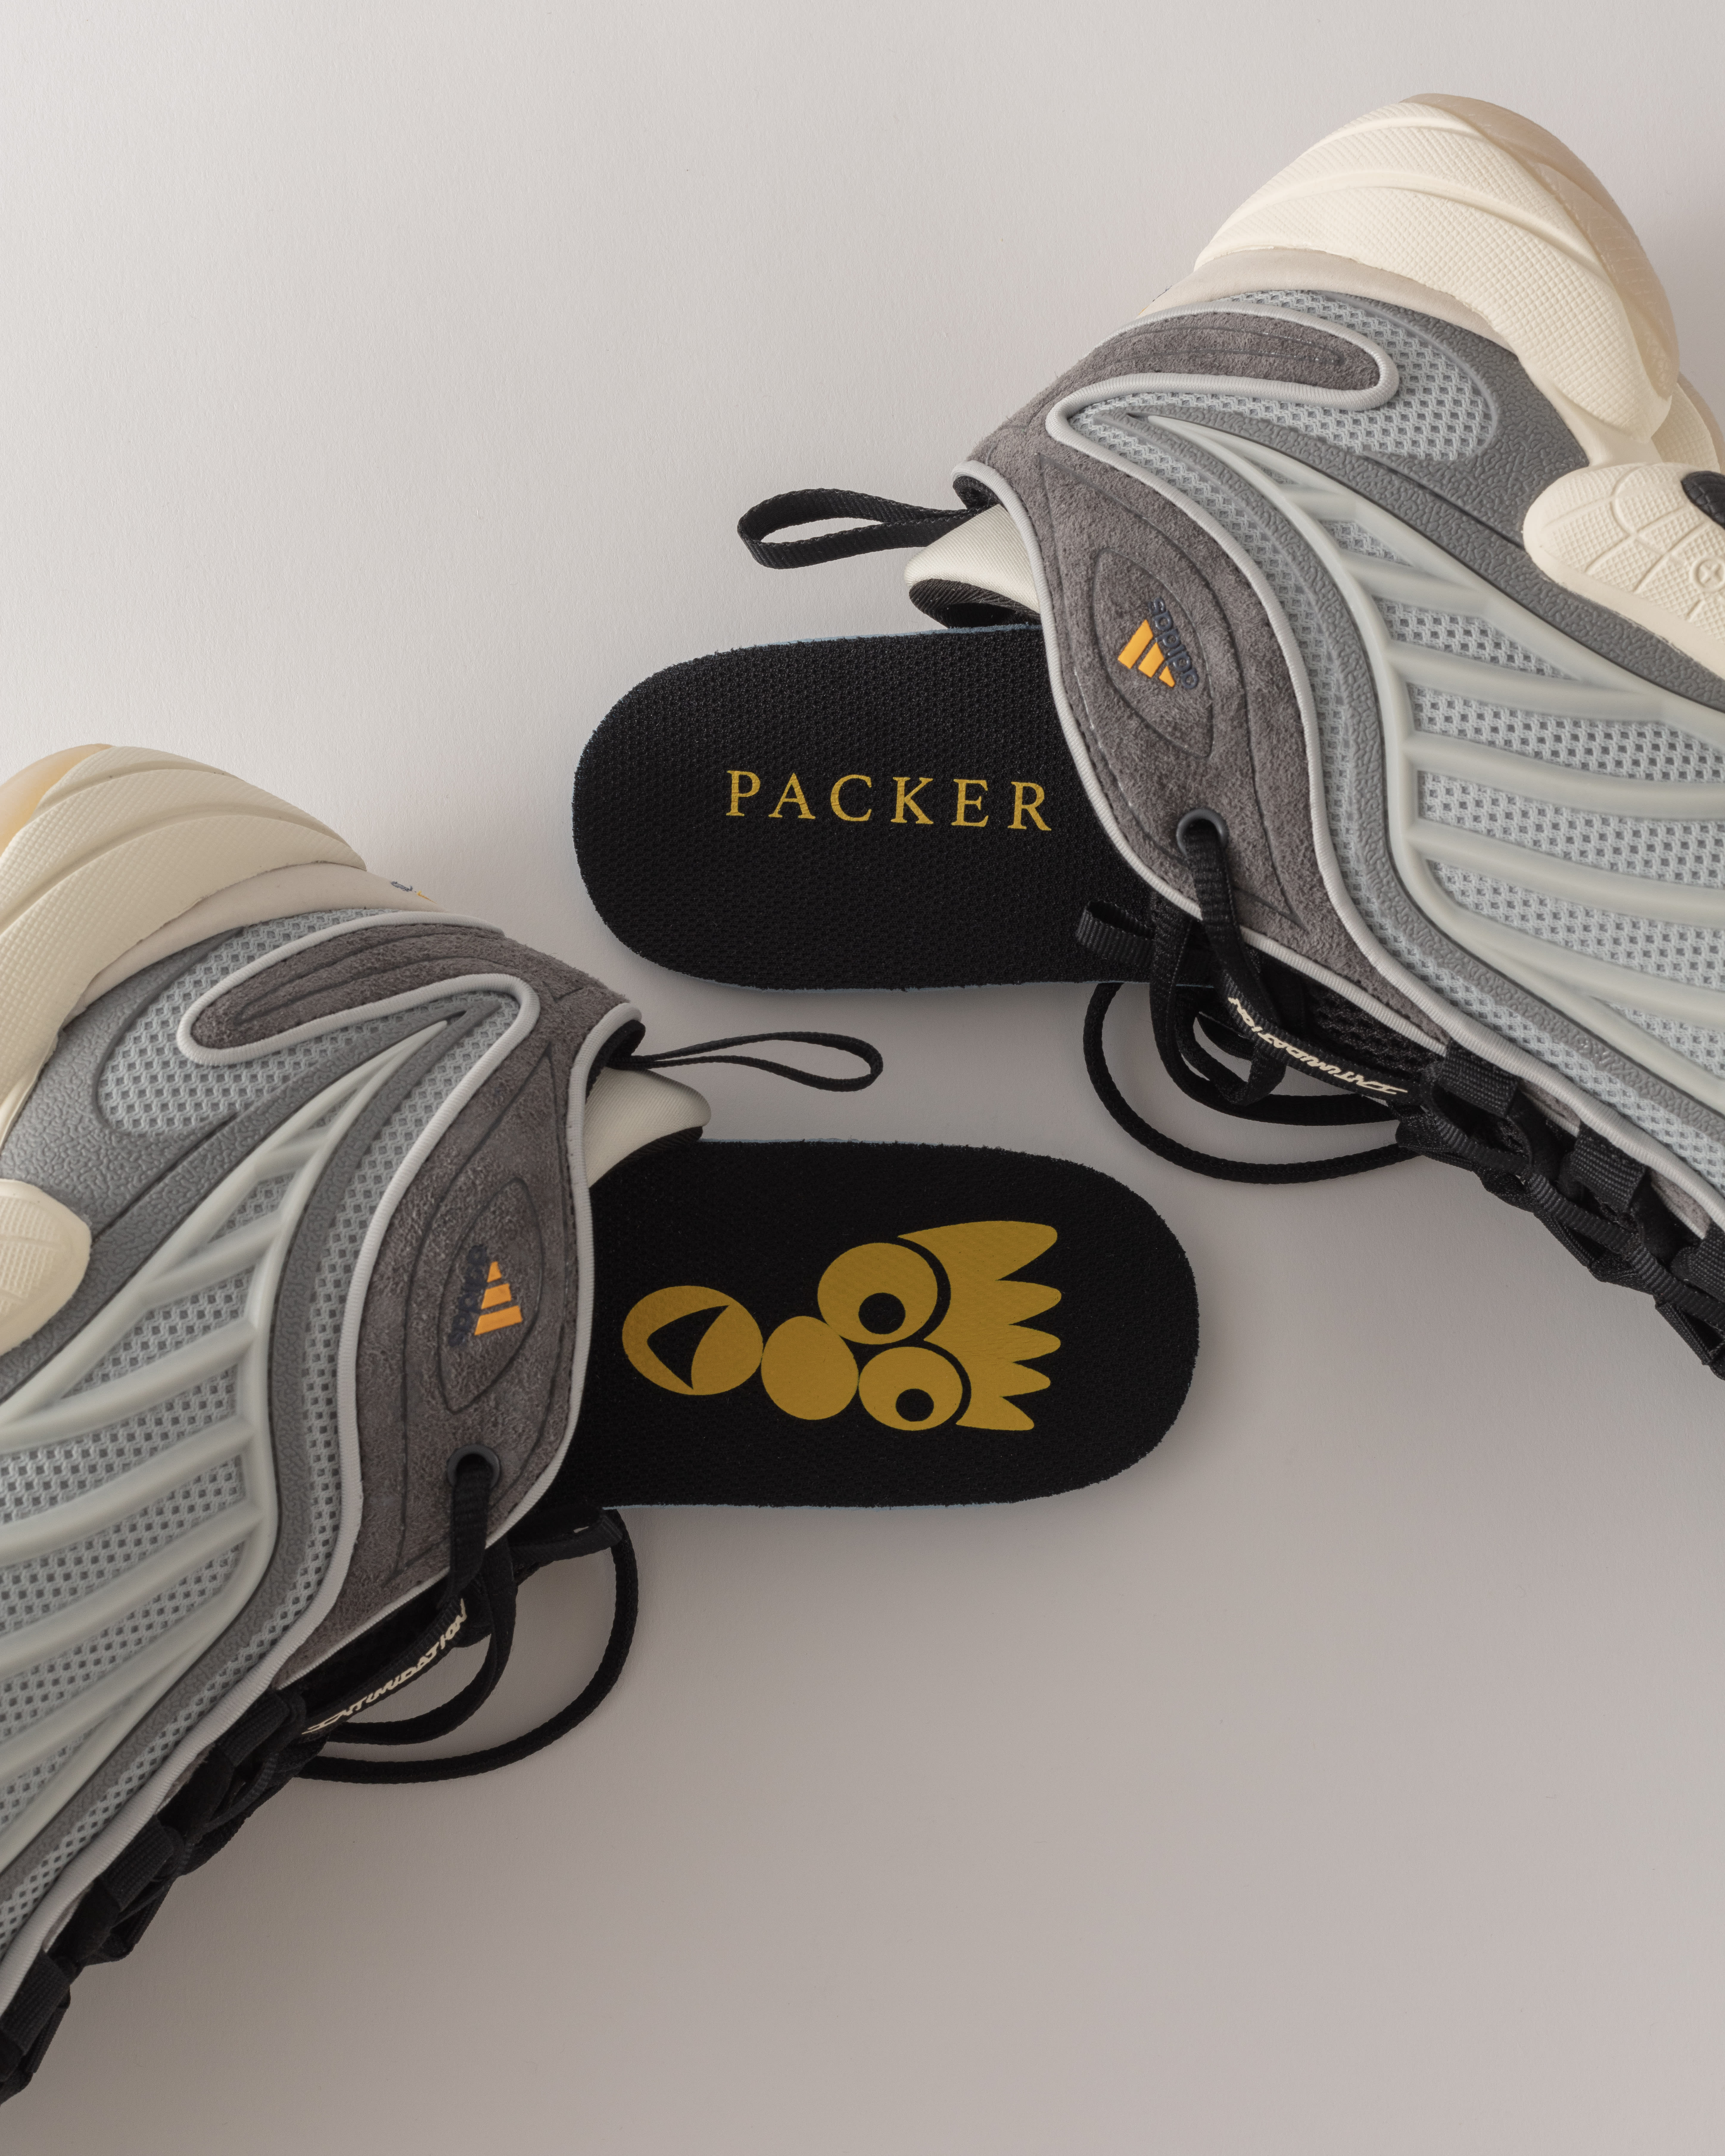 Packer's Adidas FYW Intimidation Collab Drops This Week | Complex